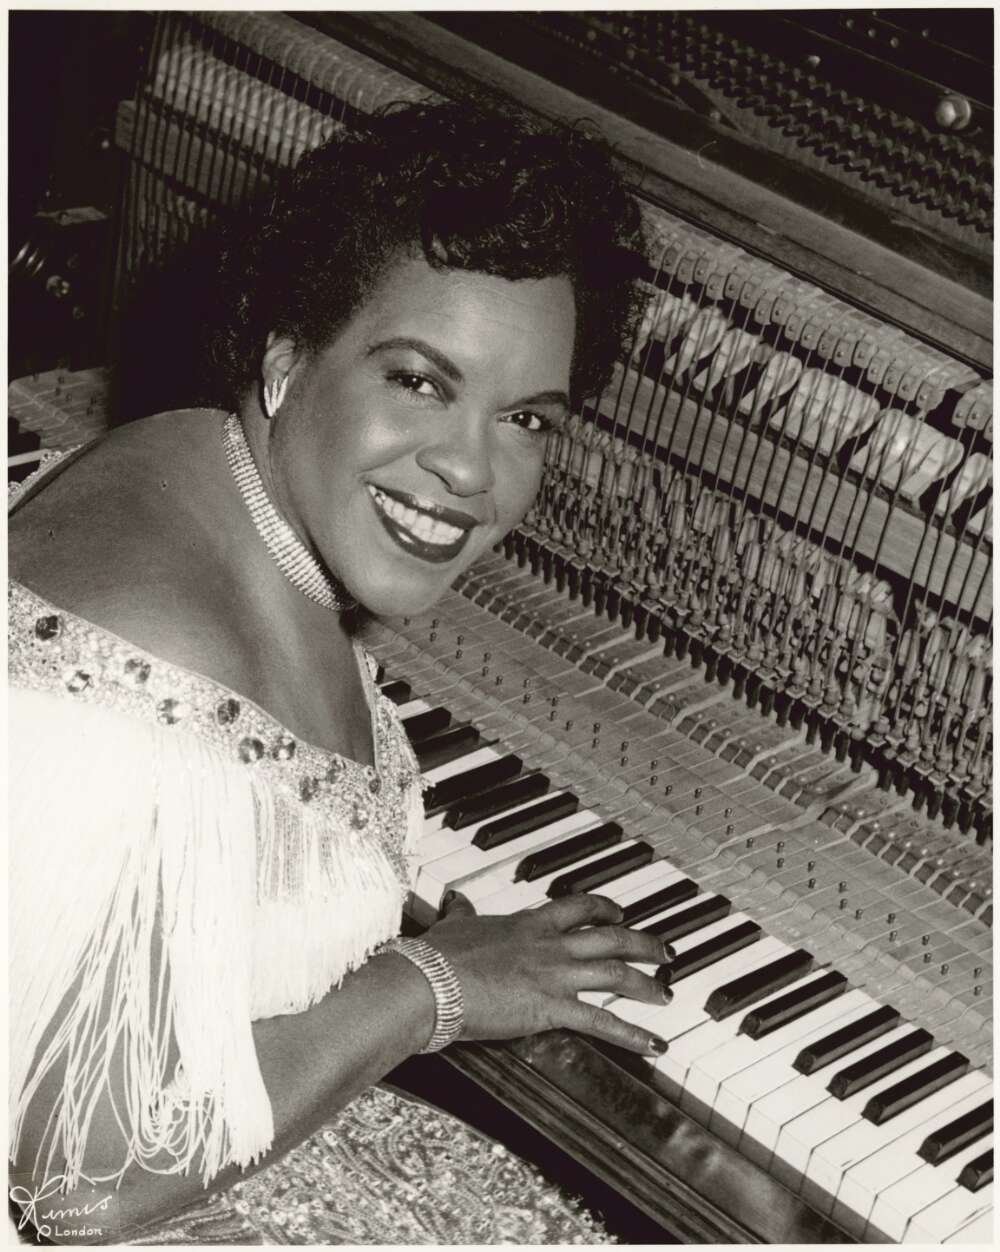 A woman sits at a piano with her head turned toward the camera, smiling